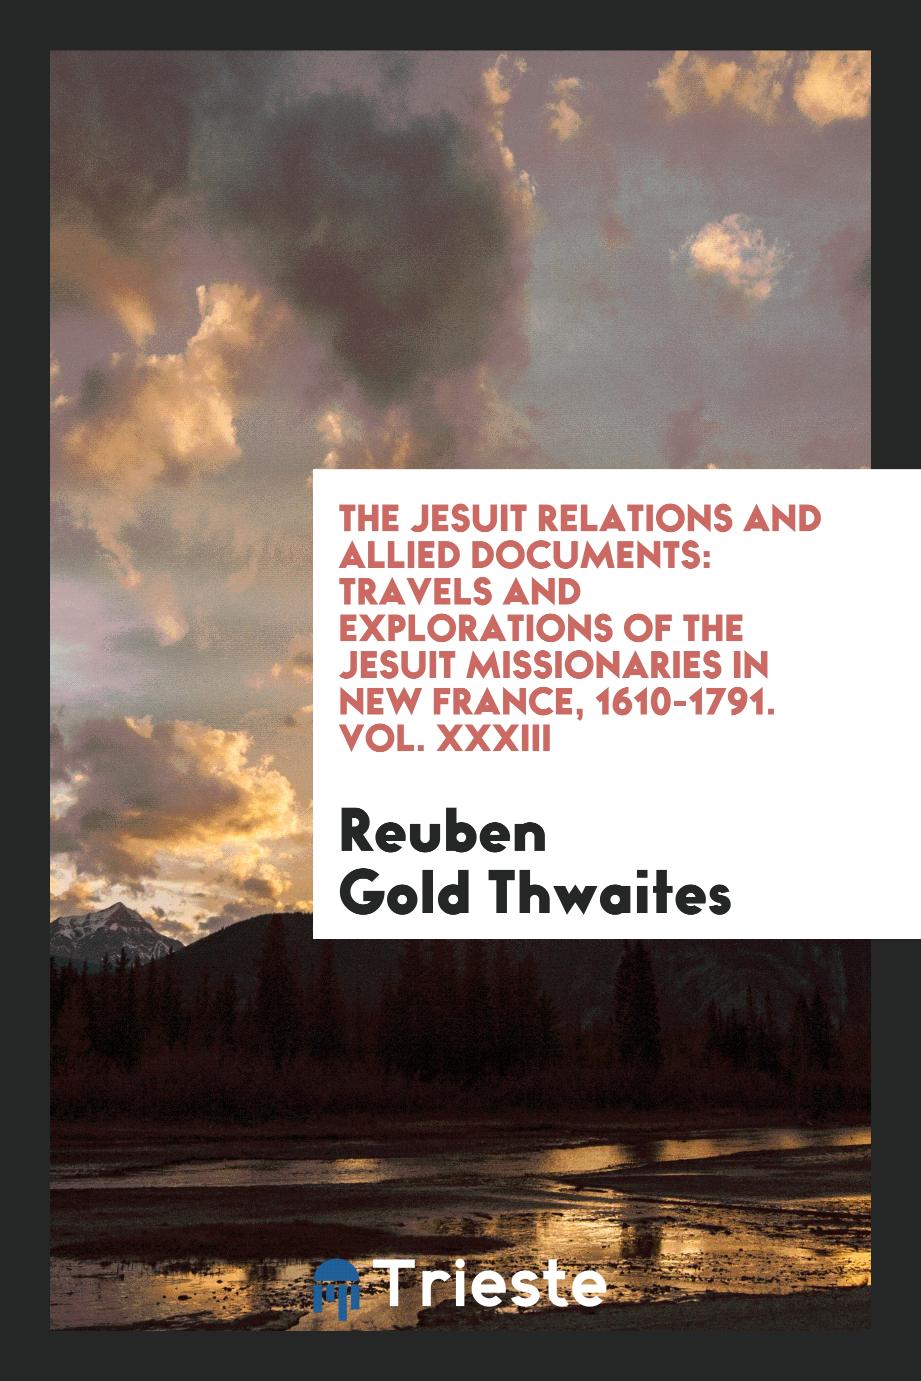 The Jesuit relations and allied documents: travels and explorations of the Jesuit missionaries in New France, 1610-1791. Vol. XXXIII